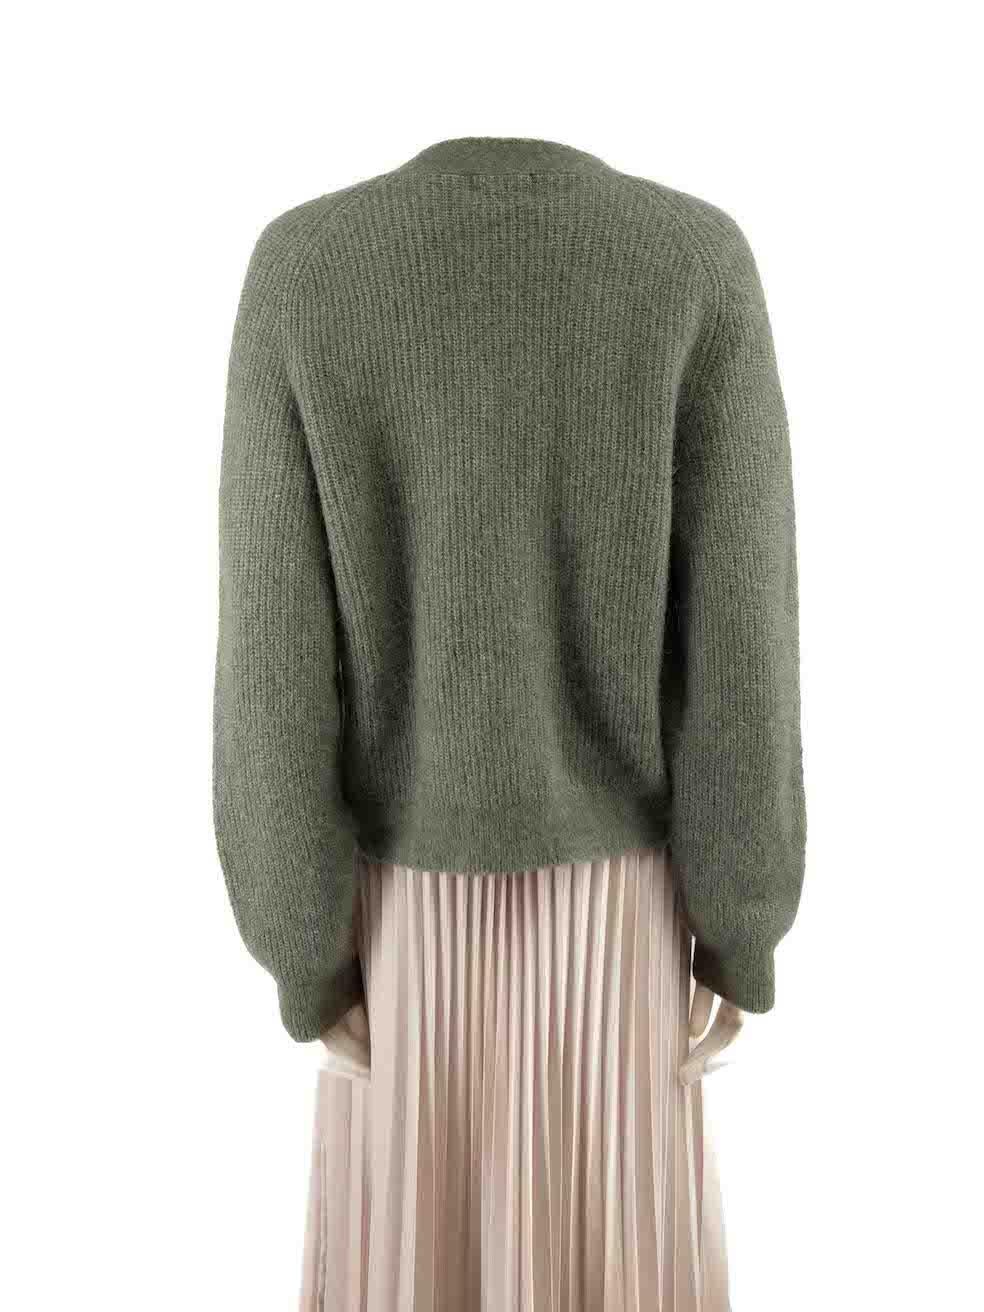 Ganni Green Wool Knit Long Sleeve Cardigan Size S In New Condition For Sale In London, GB